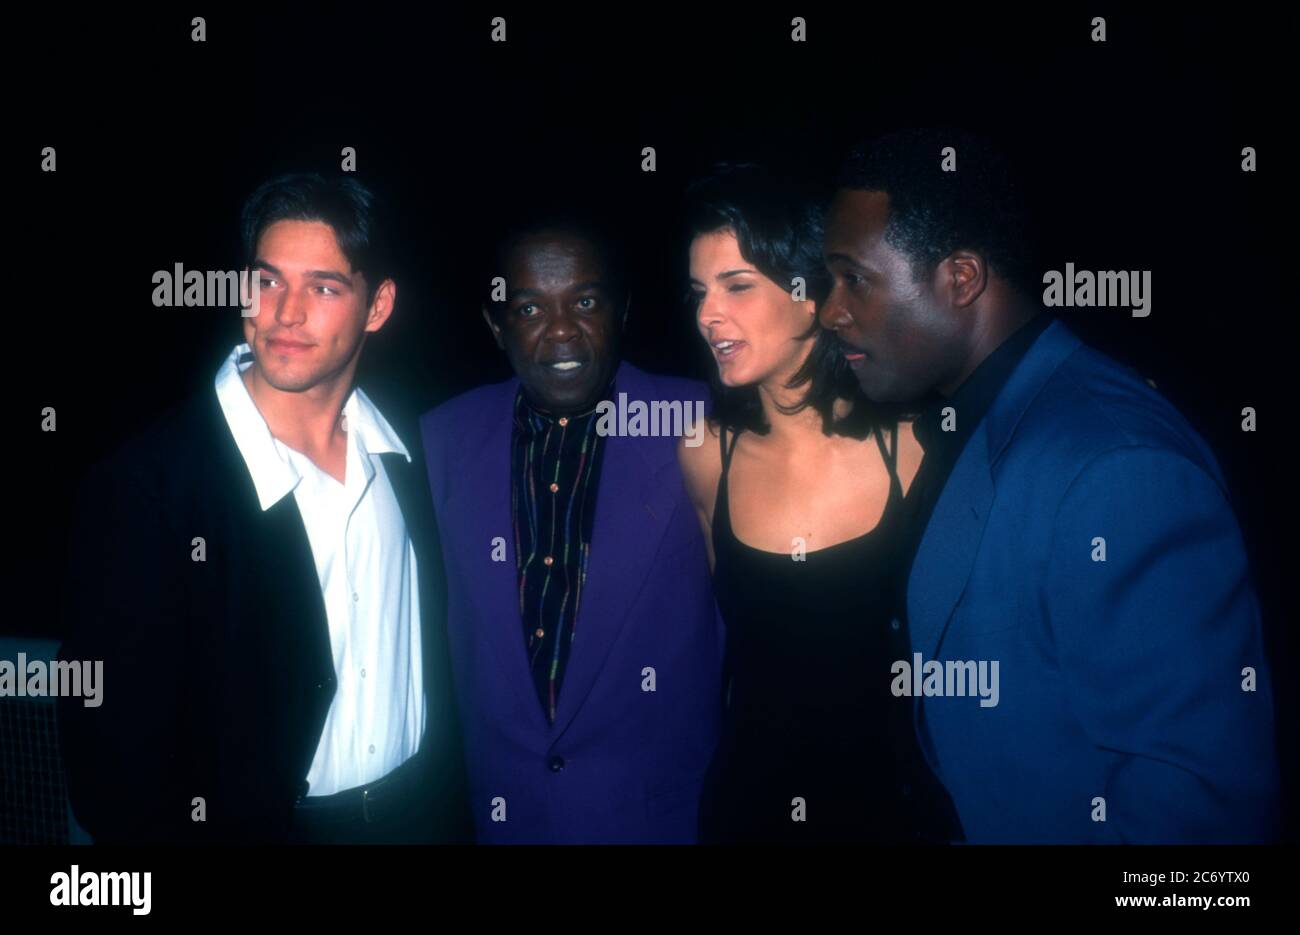 Universal City, California, USA 15th December 1995 (L-R) Actor Eddie Cibrian, singer Lou Rawls, actress Angie Harmon and actor Gregory Alan Williams attend Baywatch & Baywatch Nights Holiday Party on December 15, 1995 at B.B. King's Blues Club in Universal City, California, USA. Photo by Barry King/Alamy Stock Photo Stock Photo